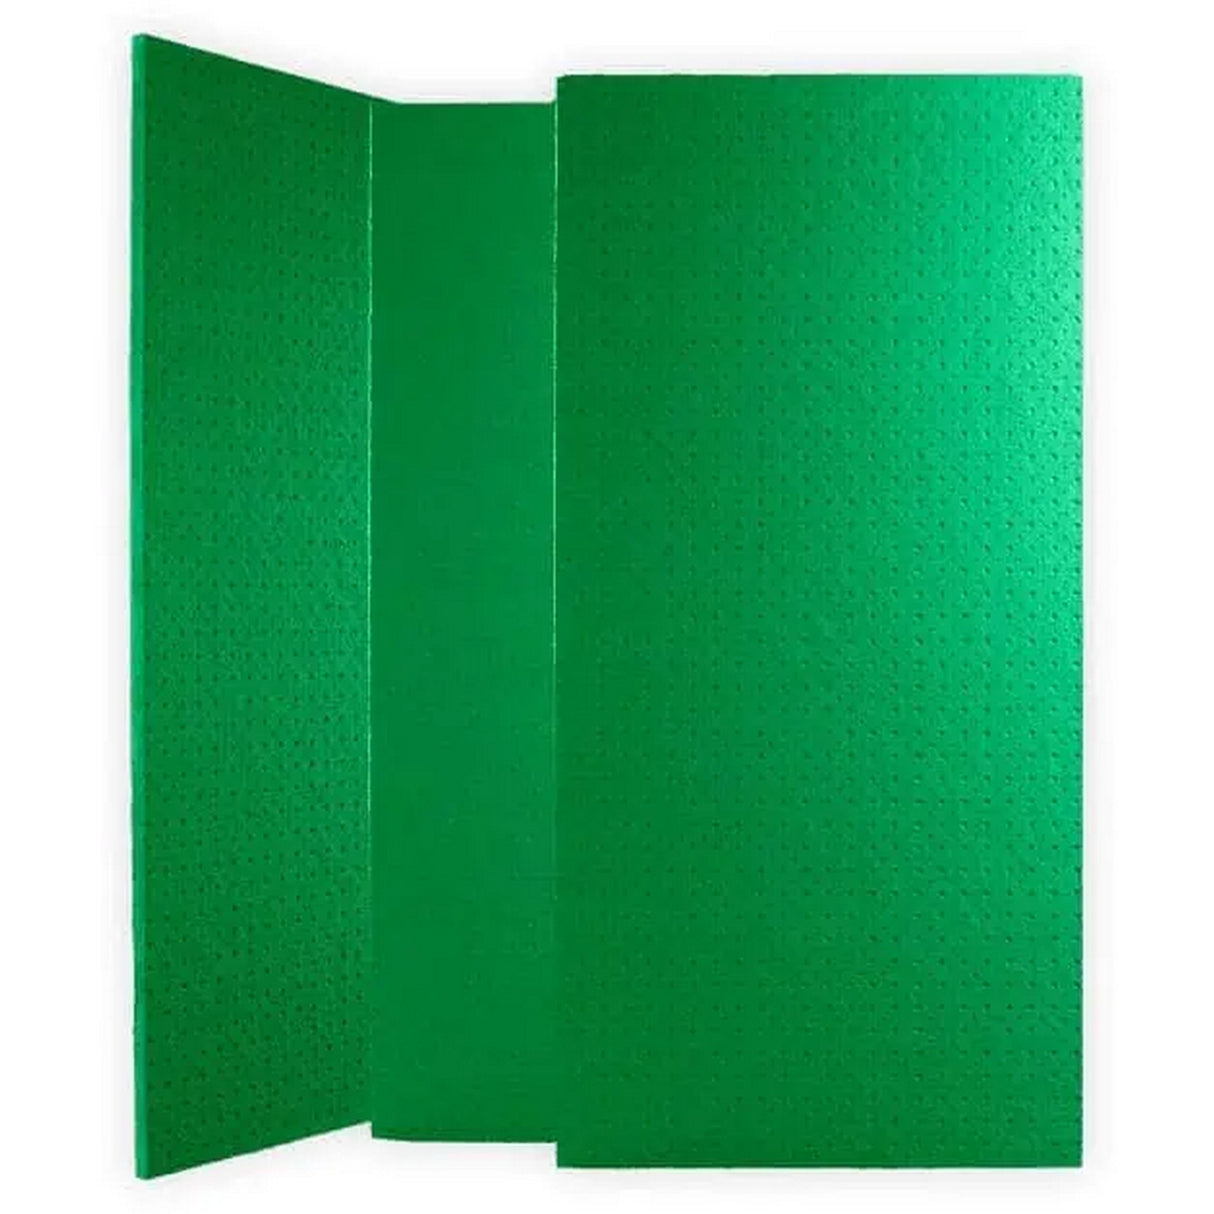 SONOPan 4 x 8-Foot Soundproofing Panel, 0.75-Inch Thick (Single Panel)